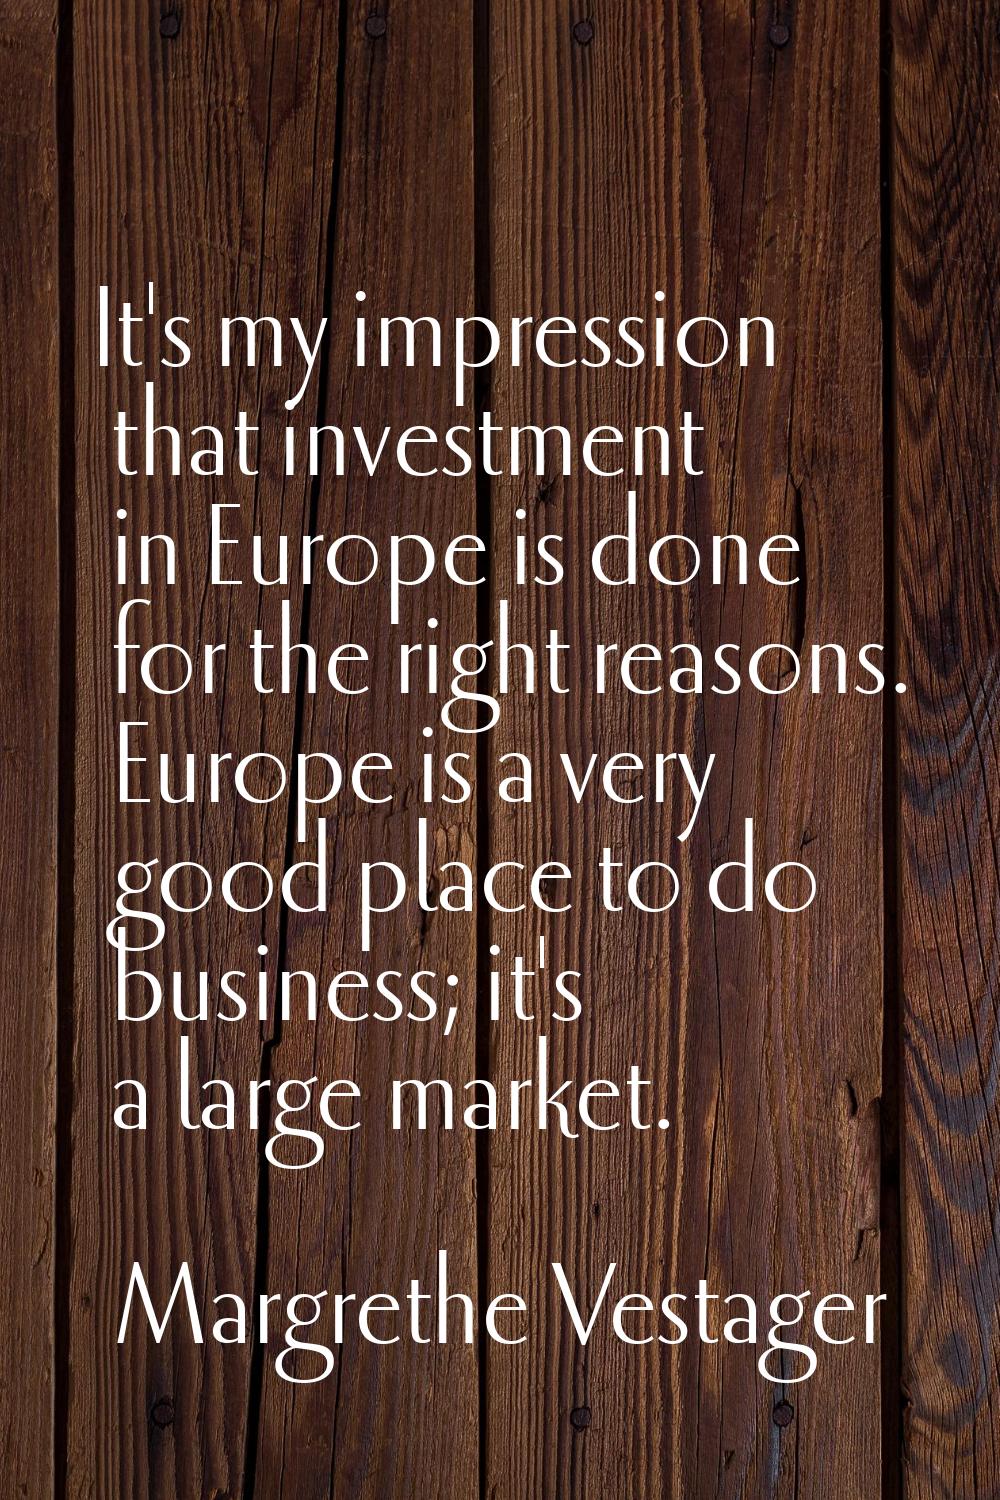 It's my impression that investment in Europe is done for the right reasons. Europe is a very good p